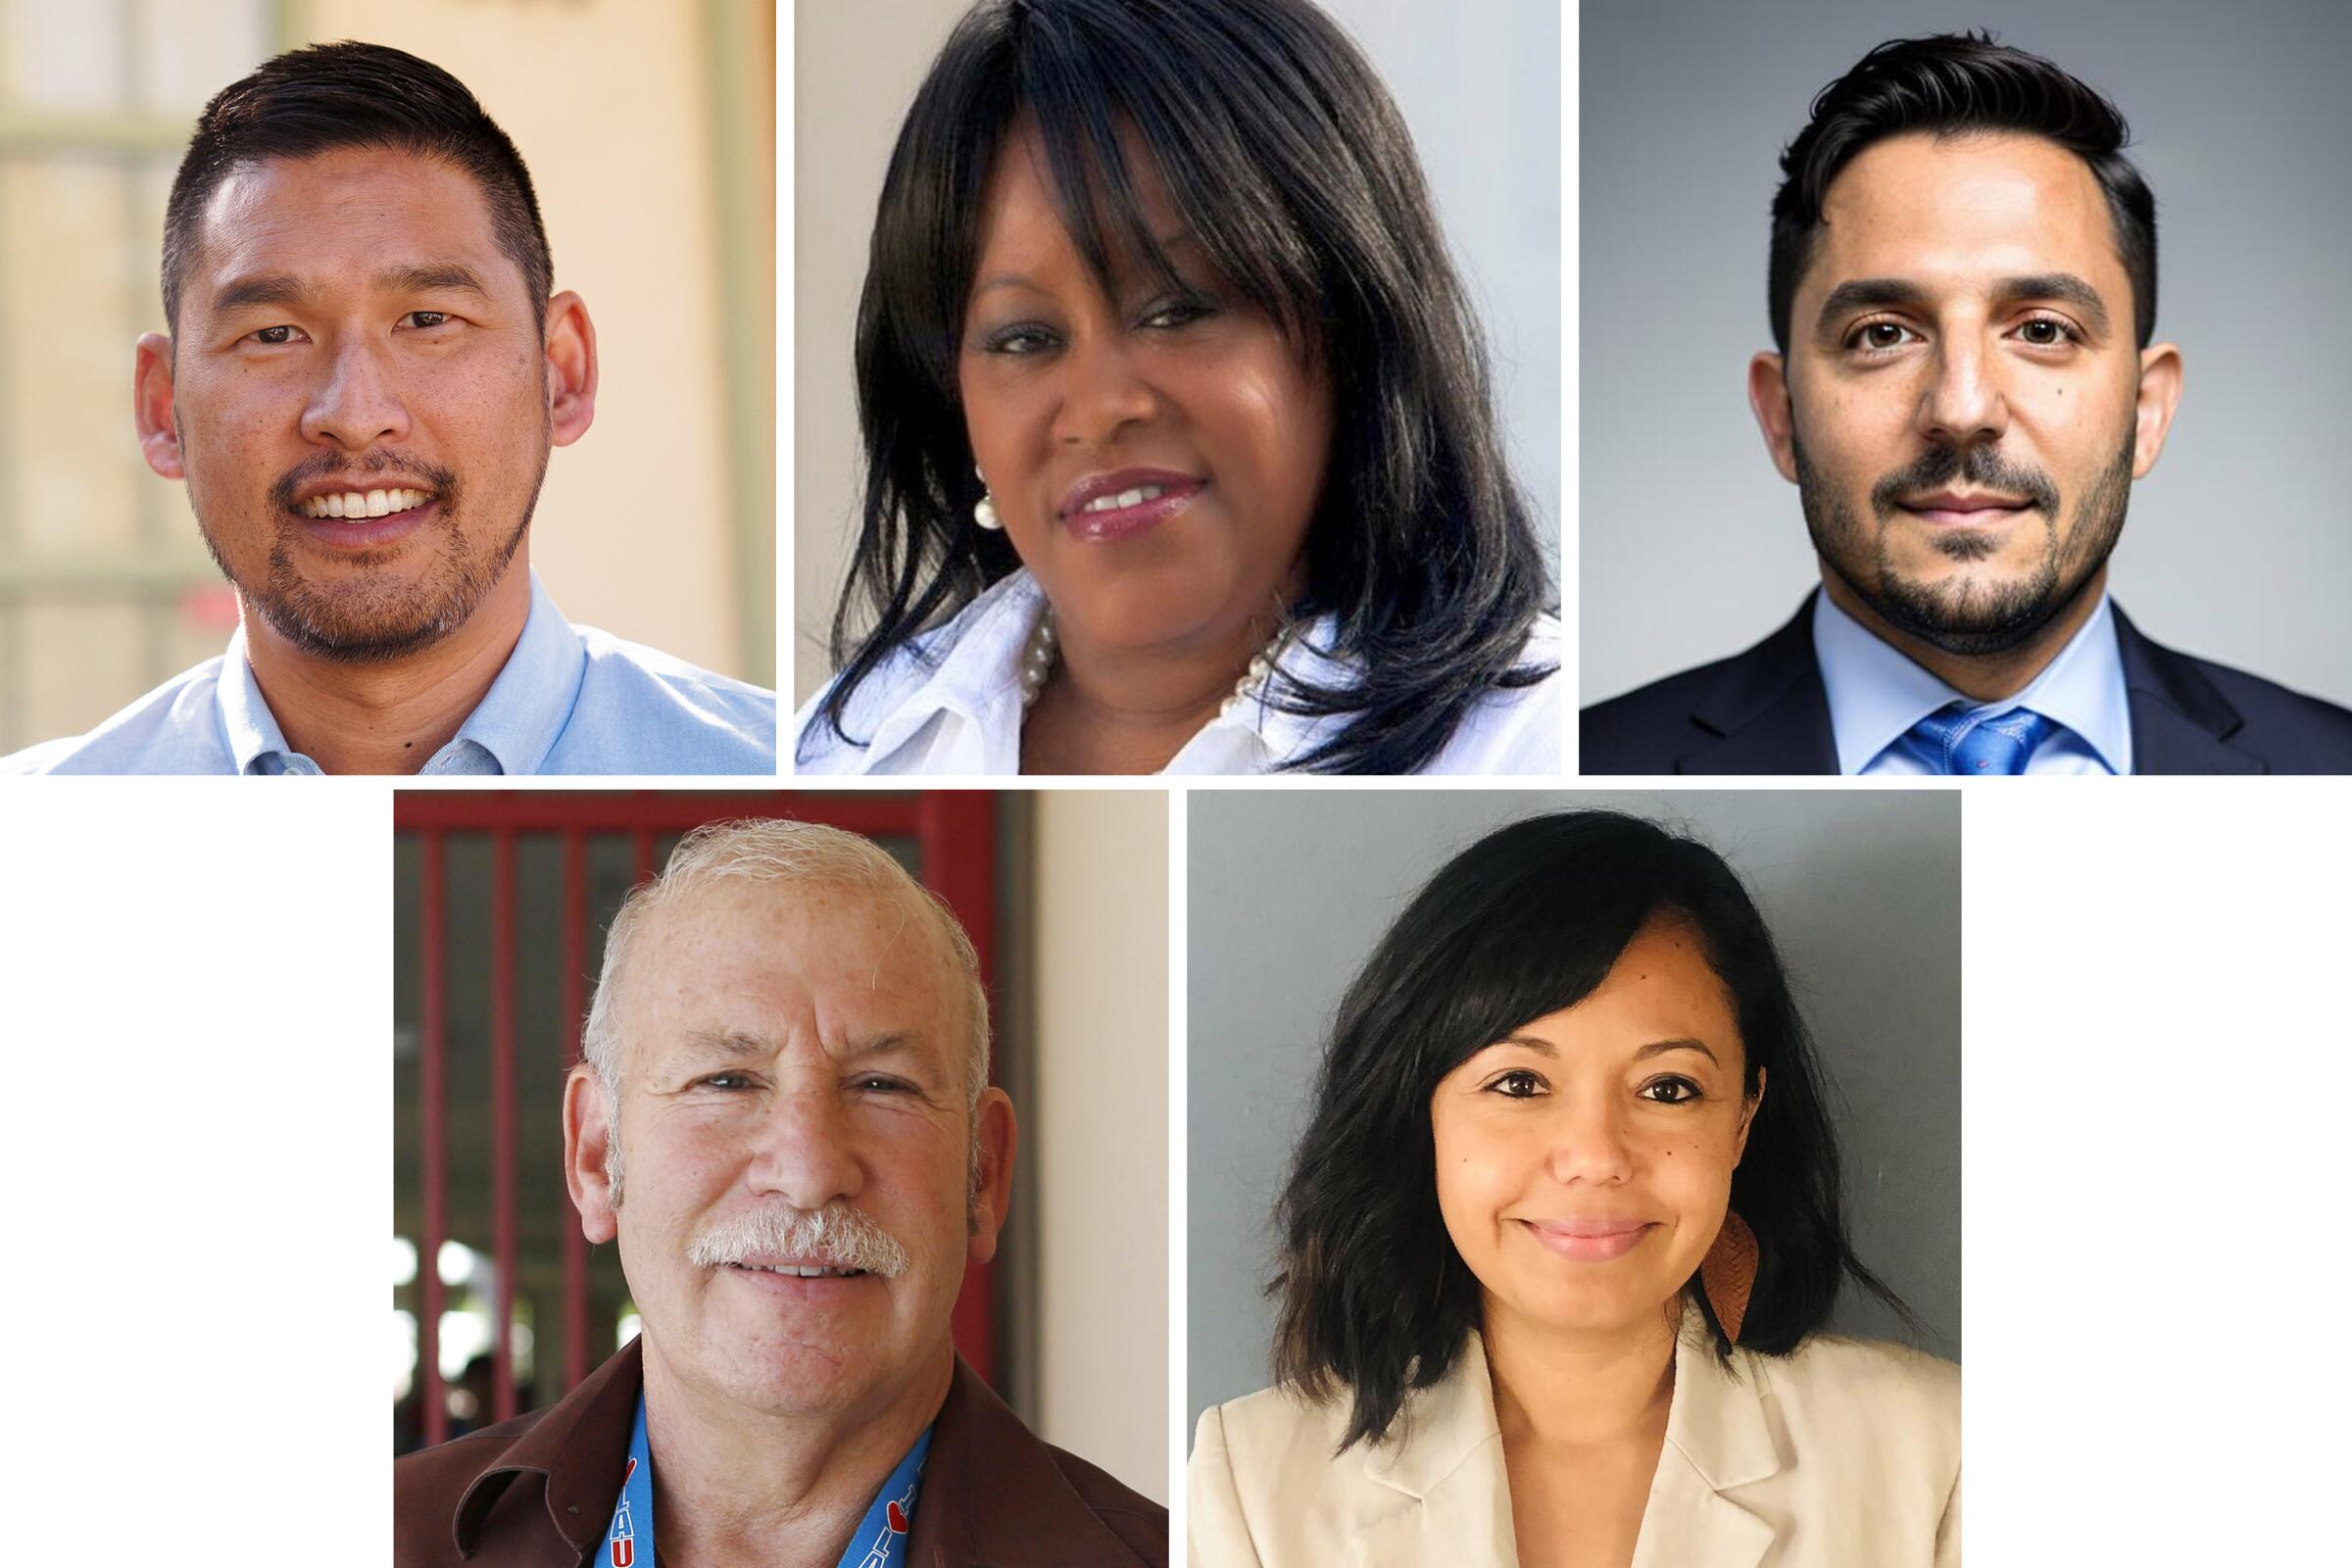 Five candidates are running for the District 3 seat on the Los Angeles Board of Education. 